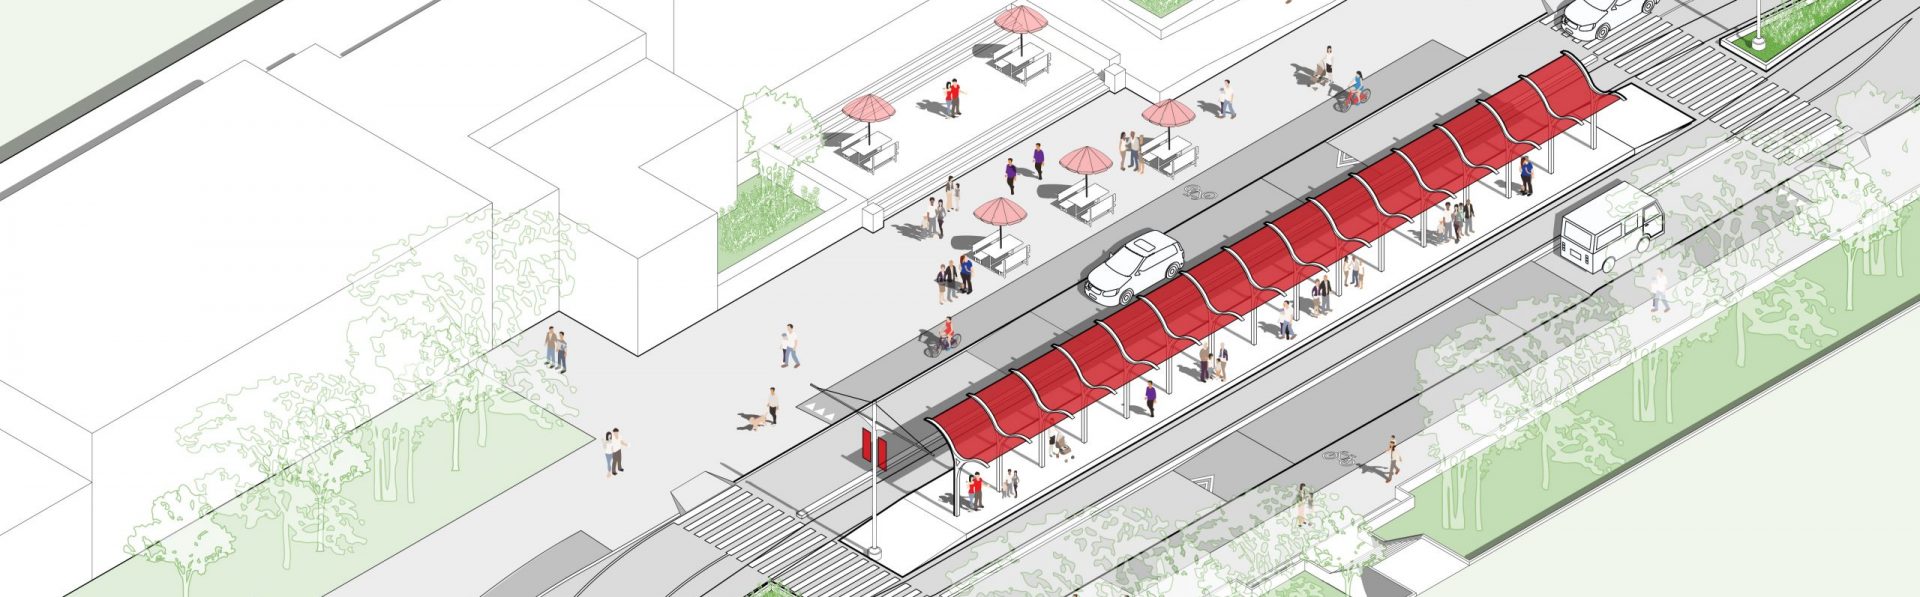 Tactical Urbanism as a Tool for Equity?